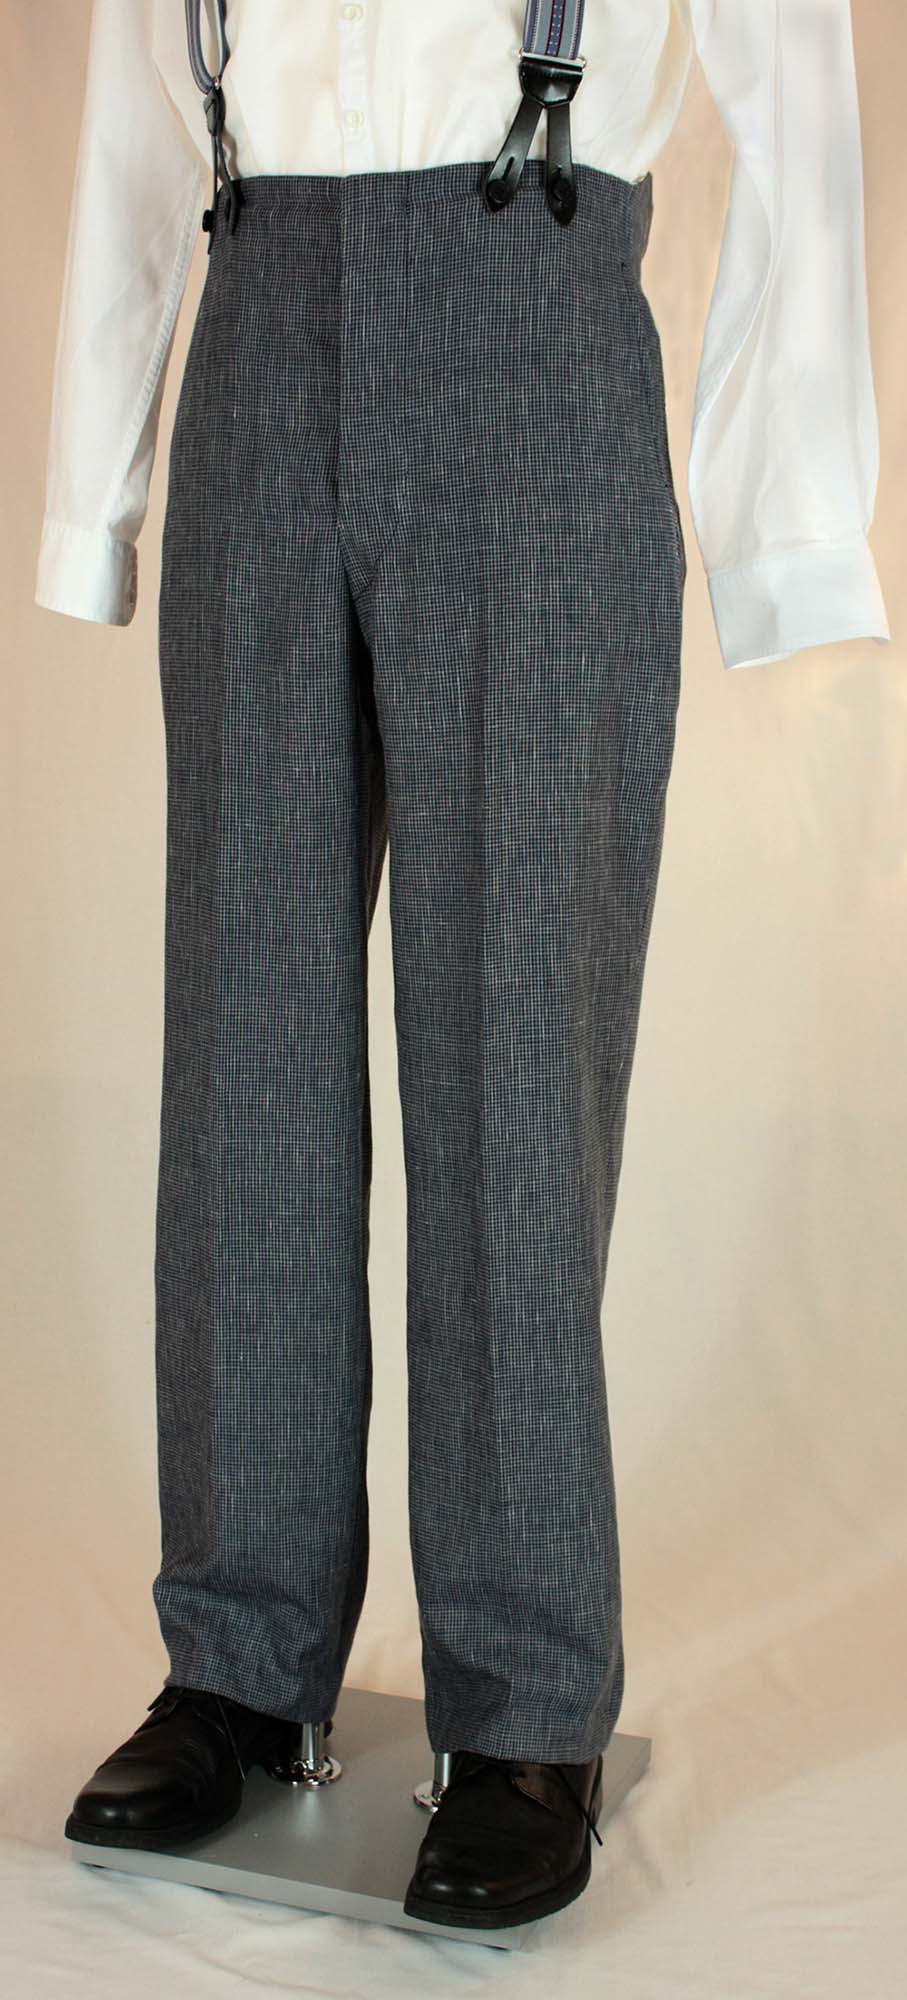 Buy 1930s 1940s Mens Vintage Style Rib Cords High Waisted Online in India   Etsy